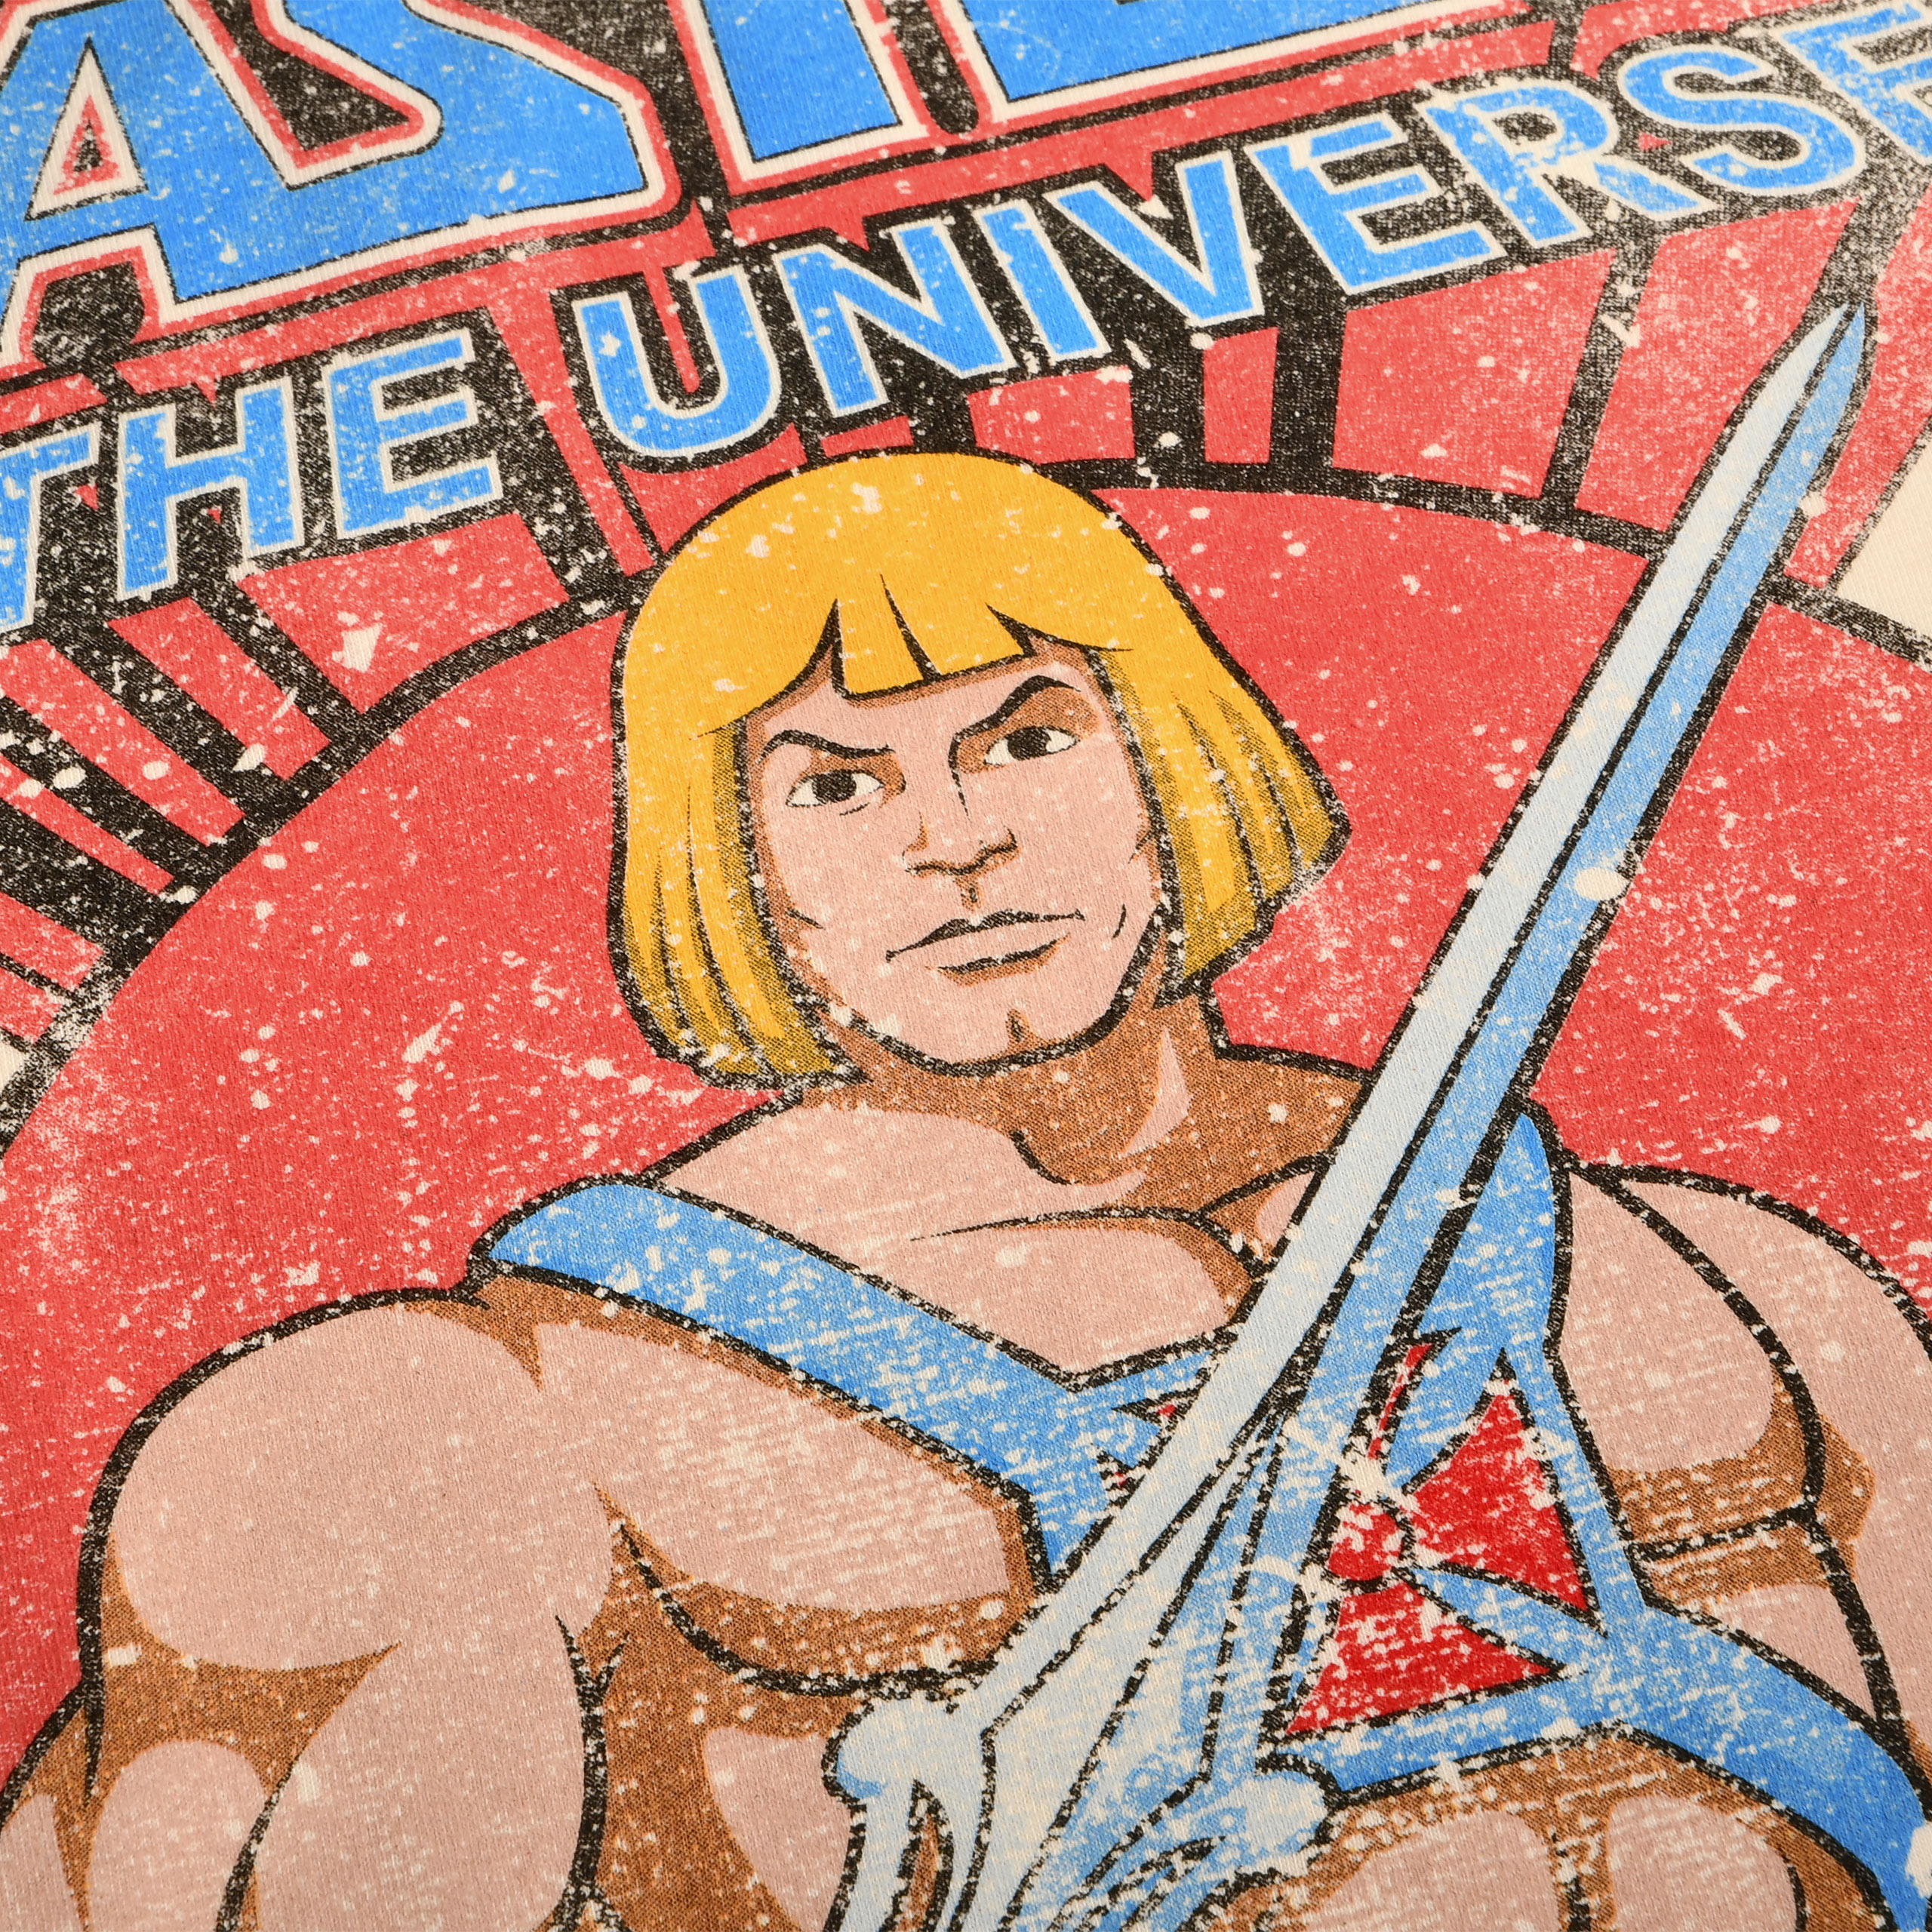 Masters of The Universe - He-Man Vintage T-Shirt creme